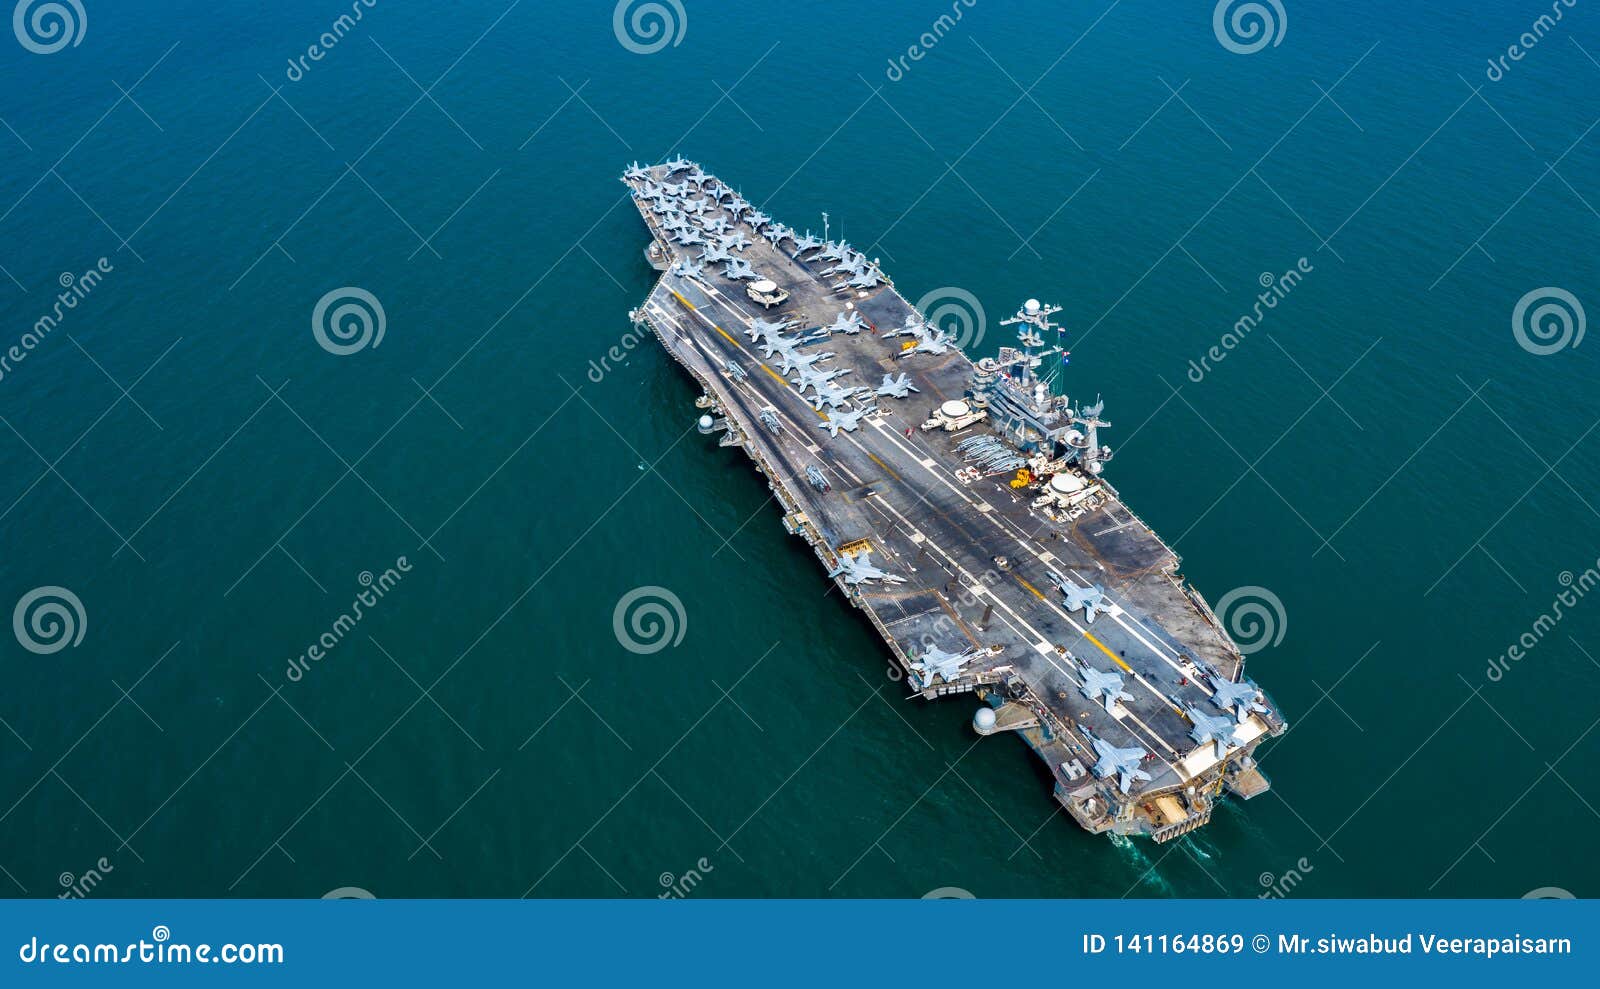 navy nuclear aircraft carrier, military navy ship carrier full loading fighter jet aircraft, aerial view